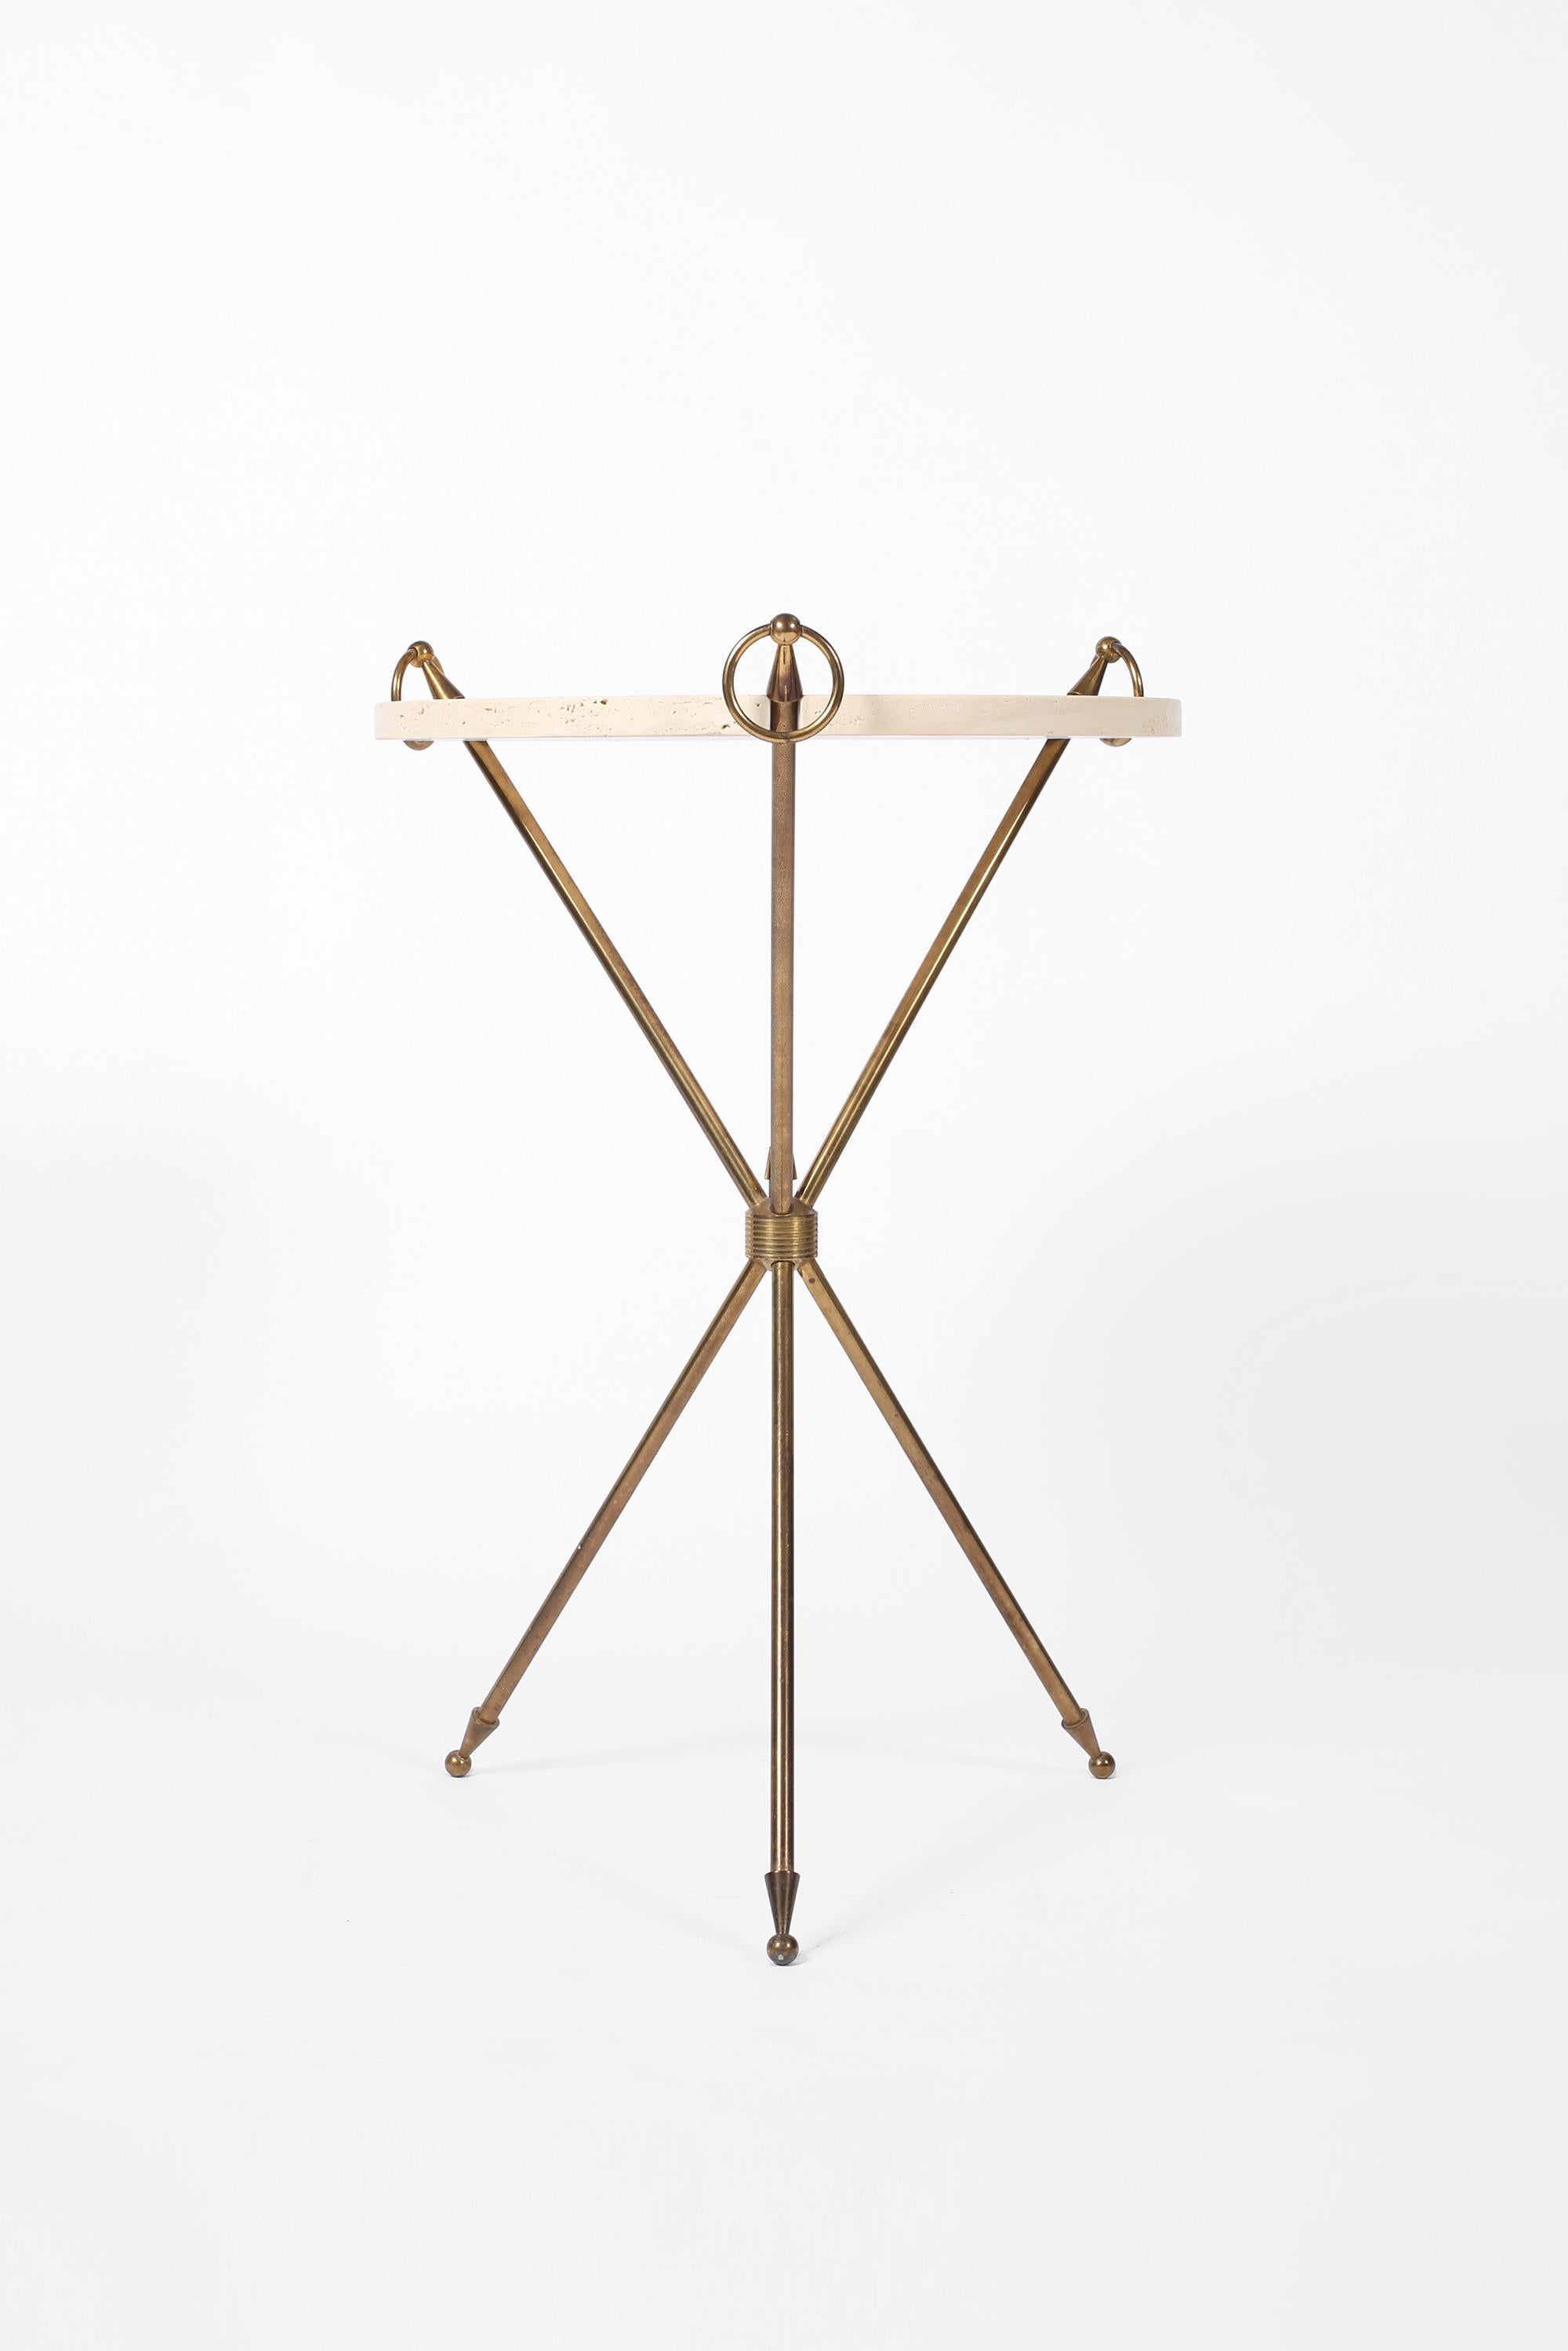 A chic brass & limestone gueridon with decorative ring detailing and tripod base, in the manner of Jean-Michel Frank. French, c. 1950s.